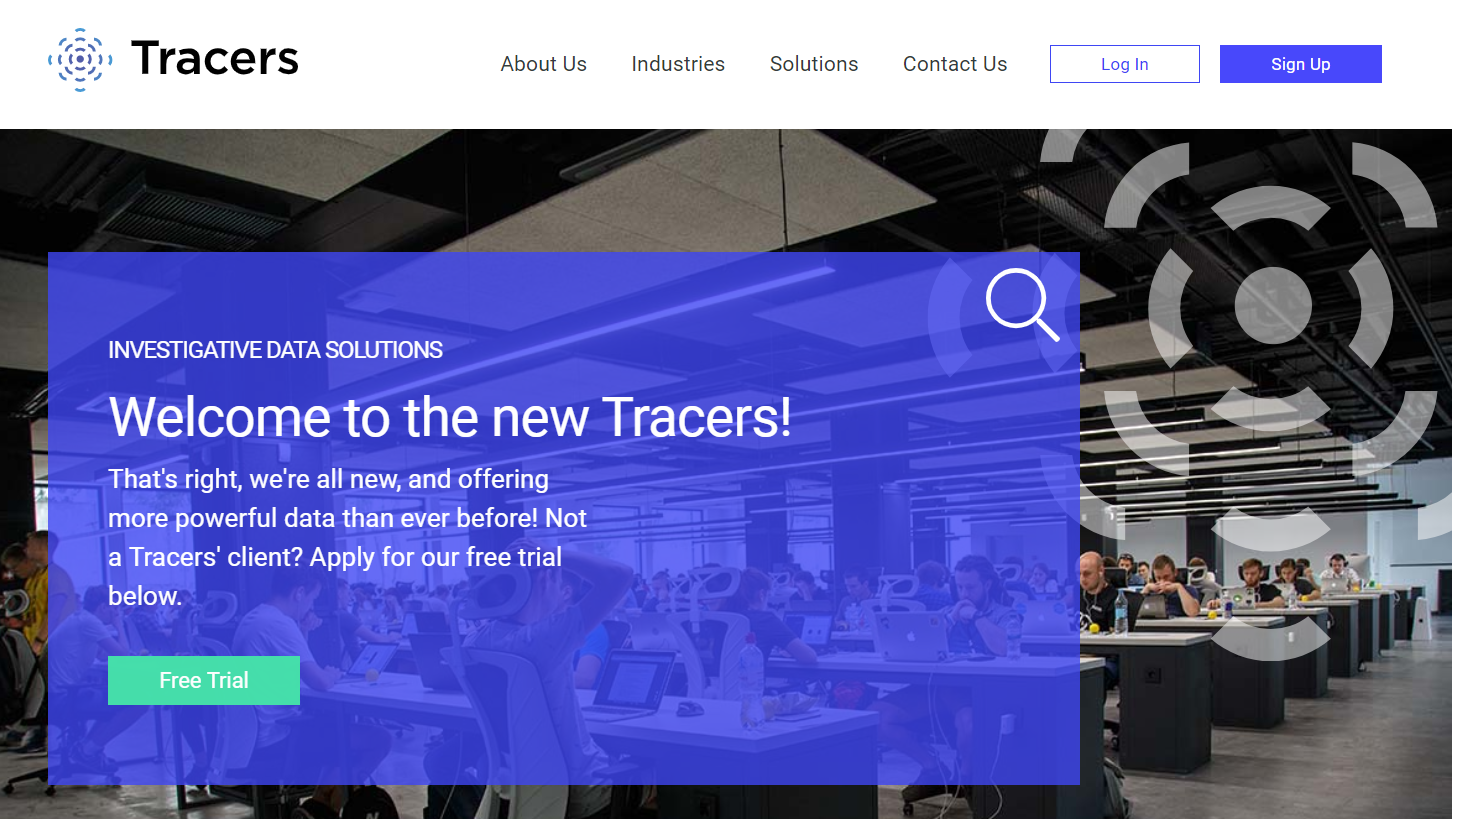 Casetext Adds Public Records Search through Partnership with Tracers